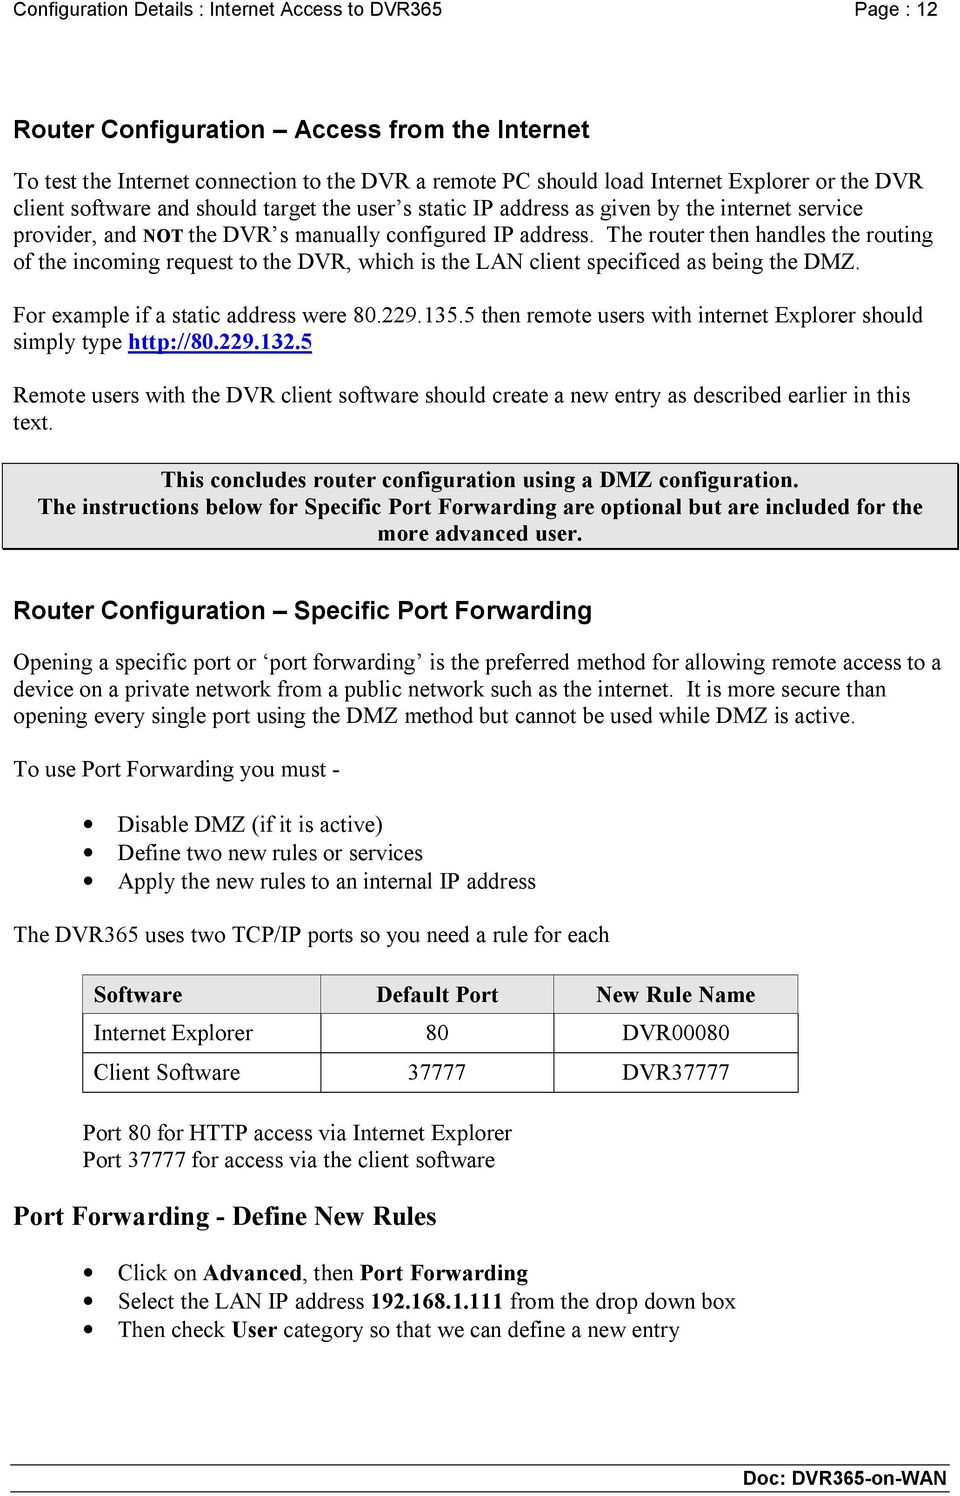 The router then handles the routing of the incoming request to the DVR, which is the LAN client specificed as being the DMZ. For example if a static address were 80.229.135.